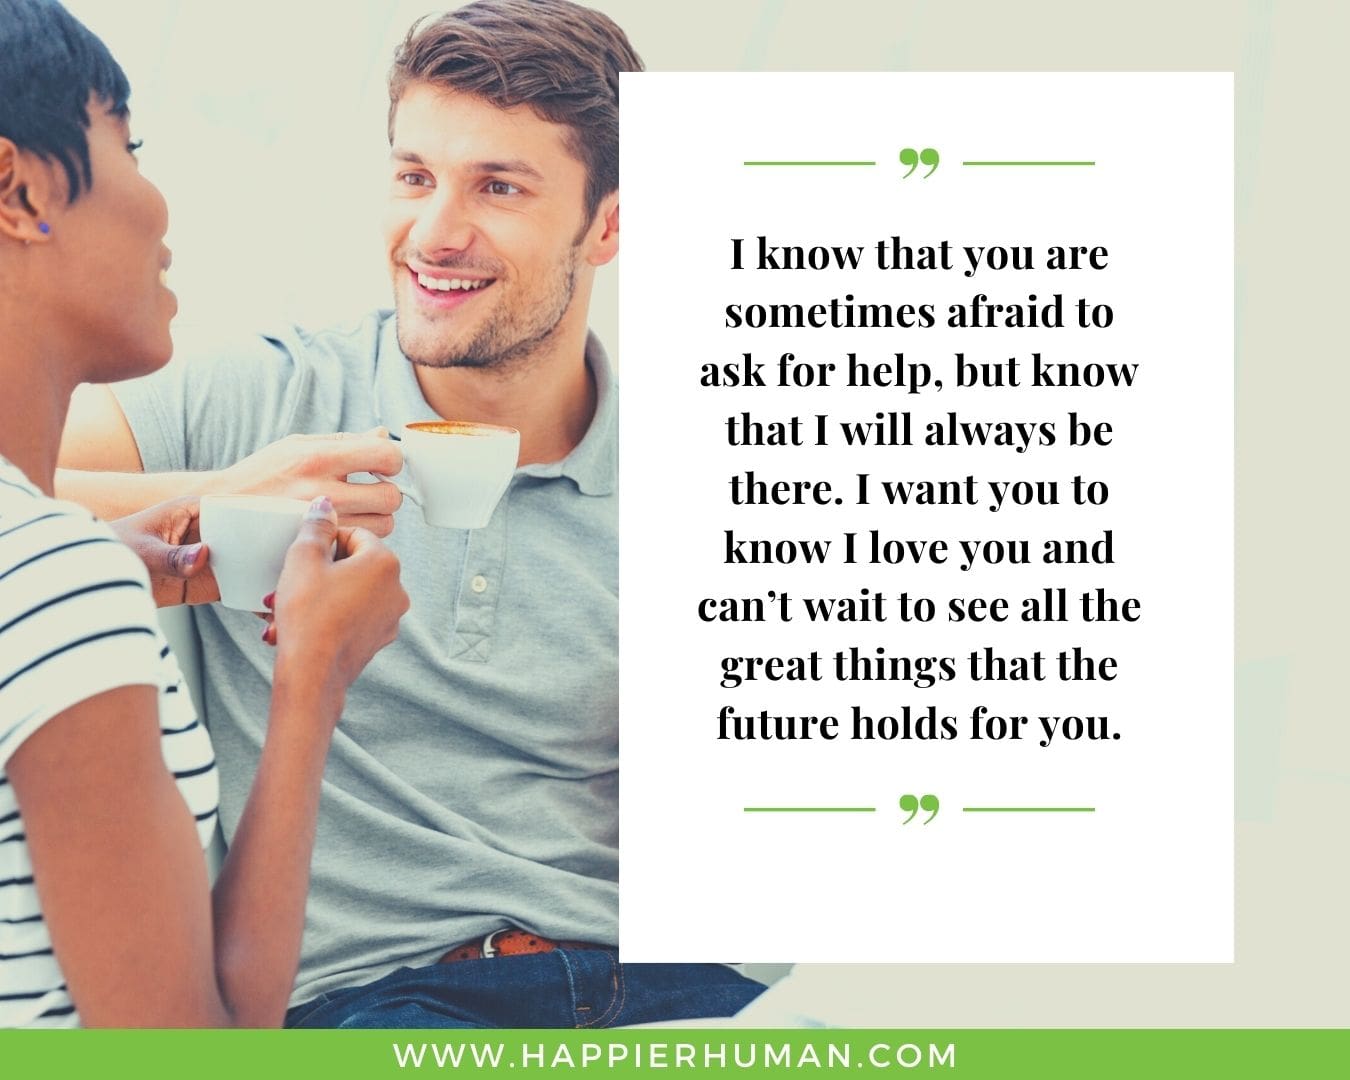 I’m Here for You Quotes - “I know that you are sometimes afraid to ask for help, but know that I will always be there. I want you to know I love you and can’t wait to see all the great things that the future holds for you.”